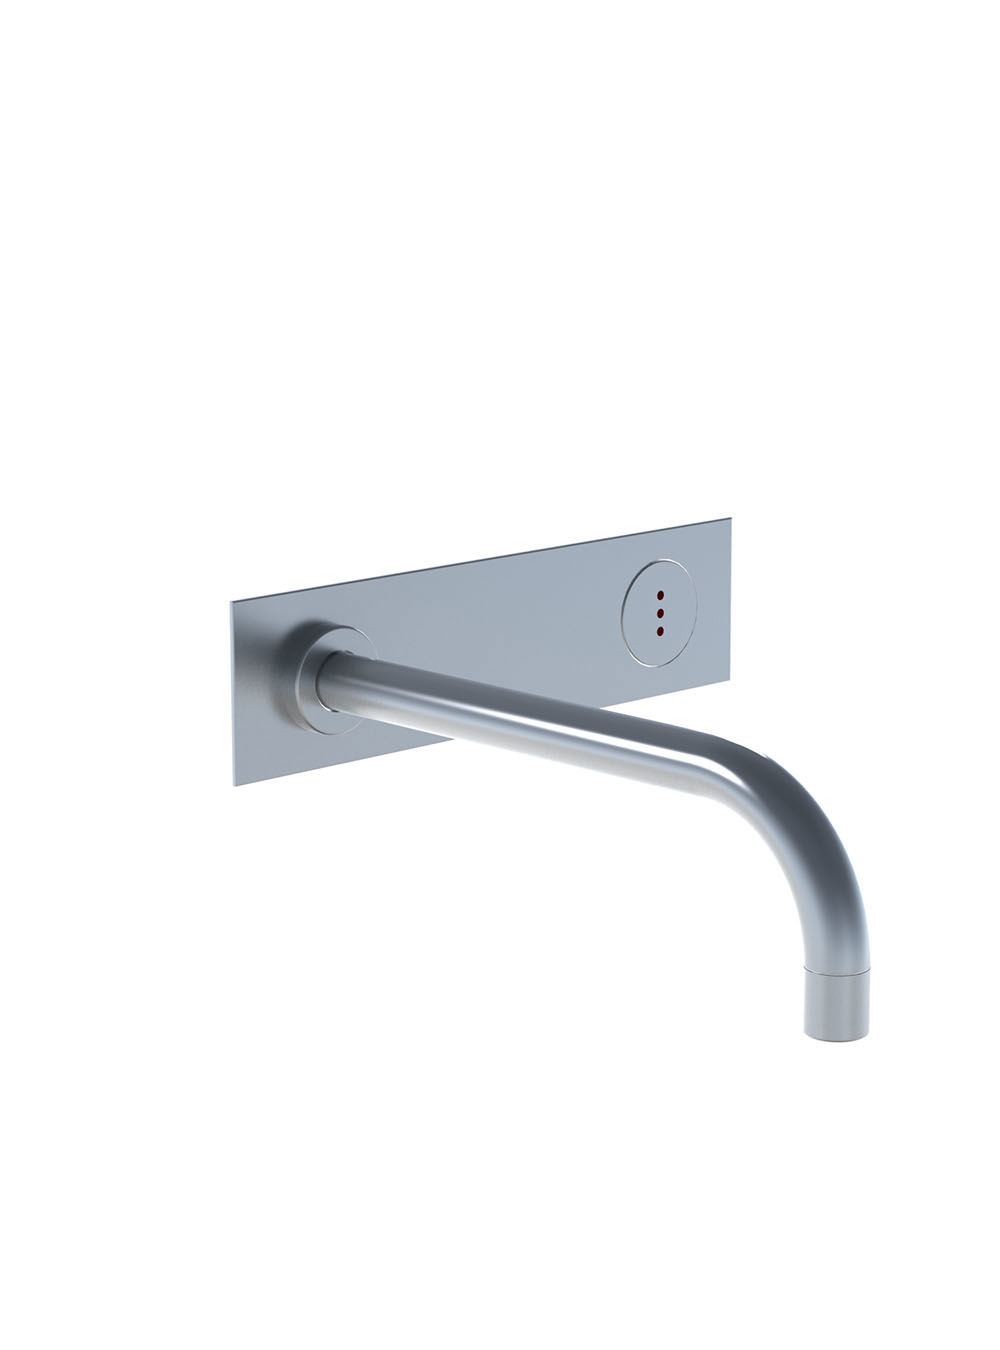 4822: Build-in basin tap with on-off sensor for ‘hands free’ 
operation. 
Sensor aligned with wall....